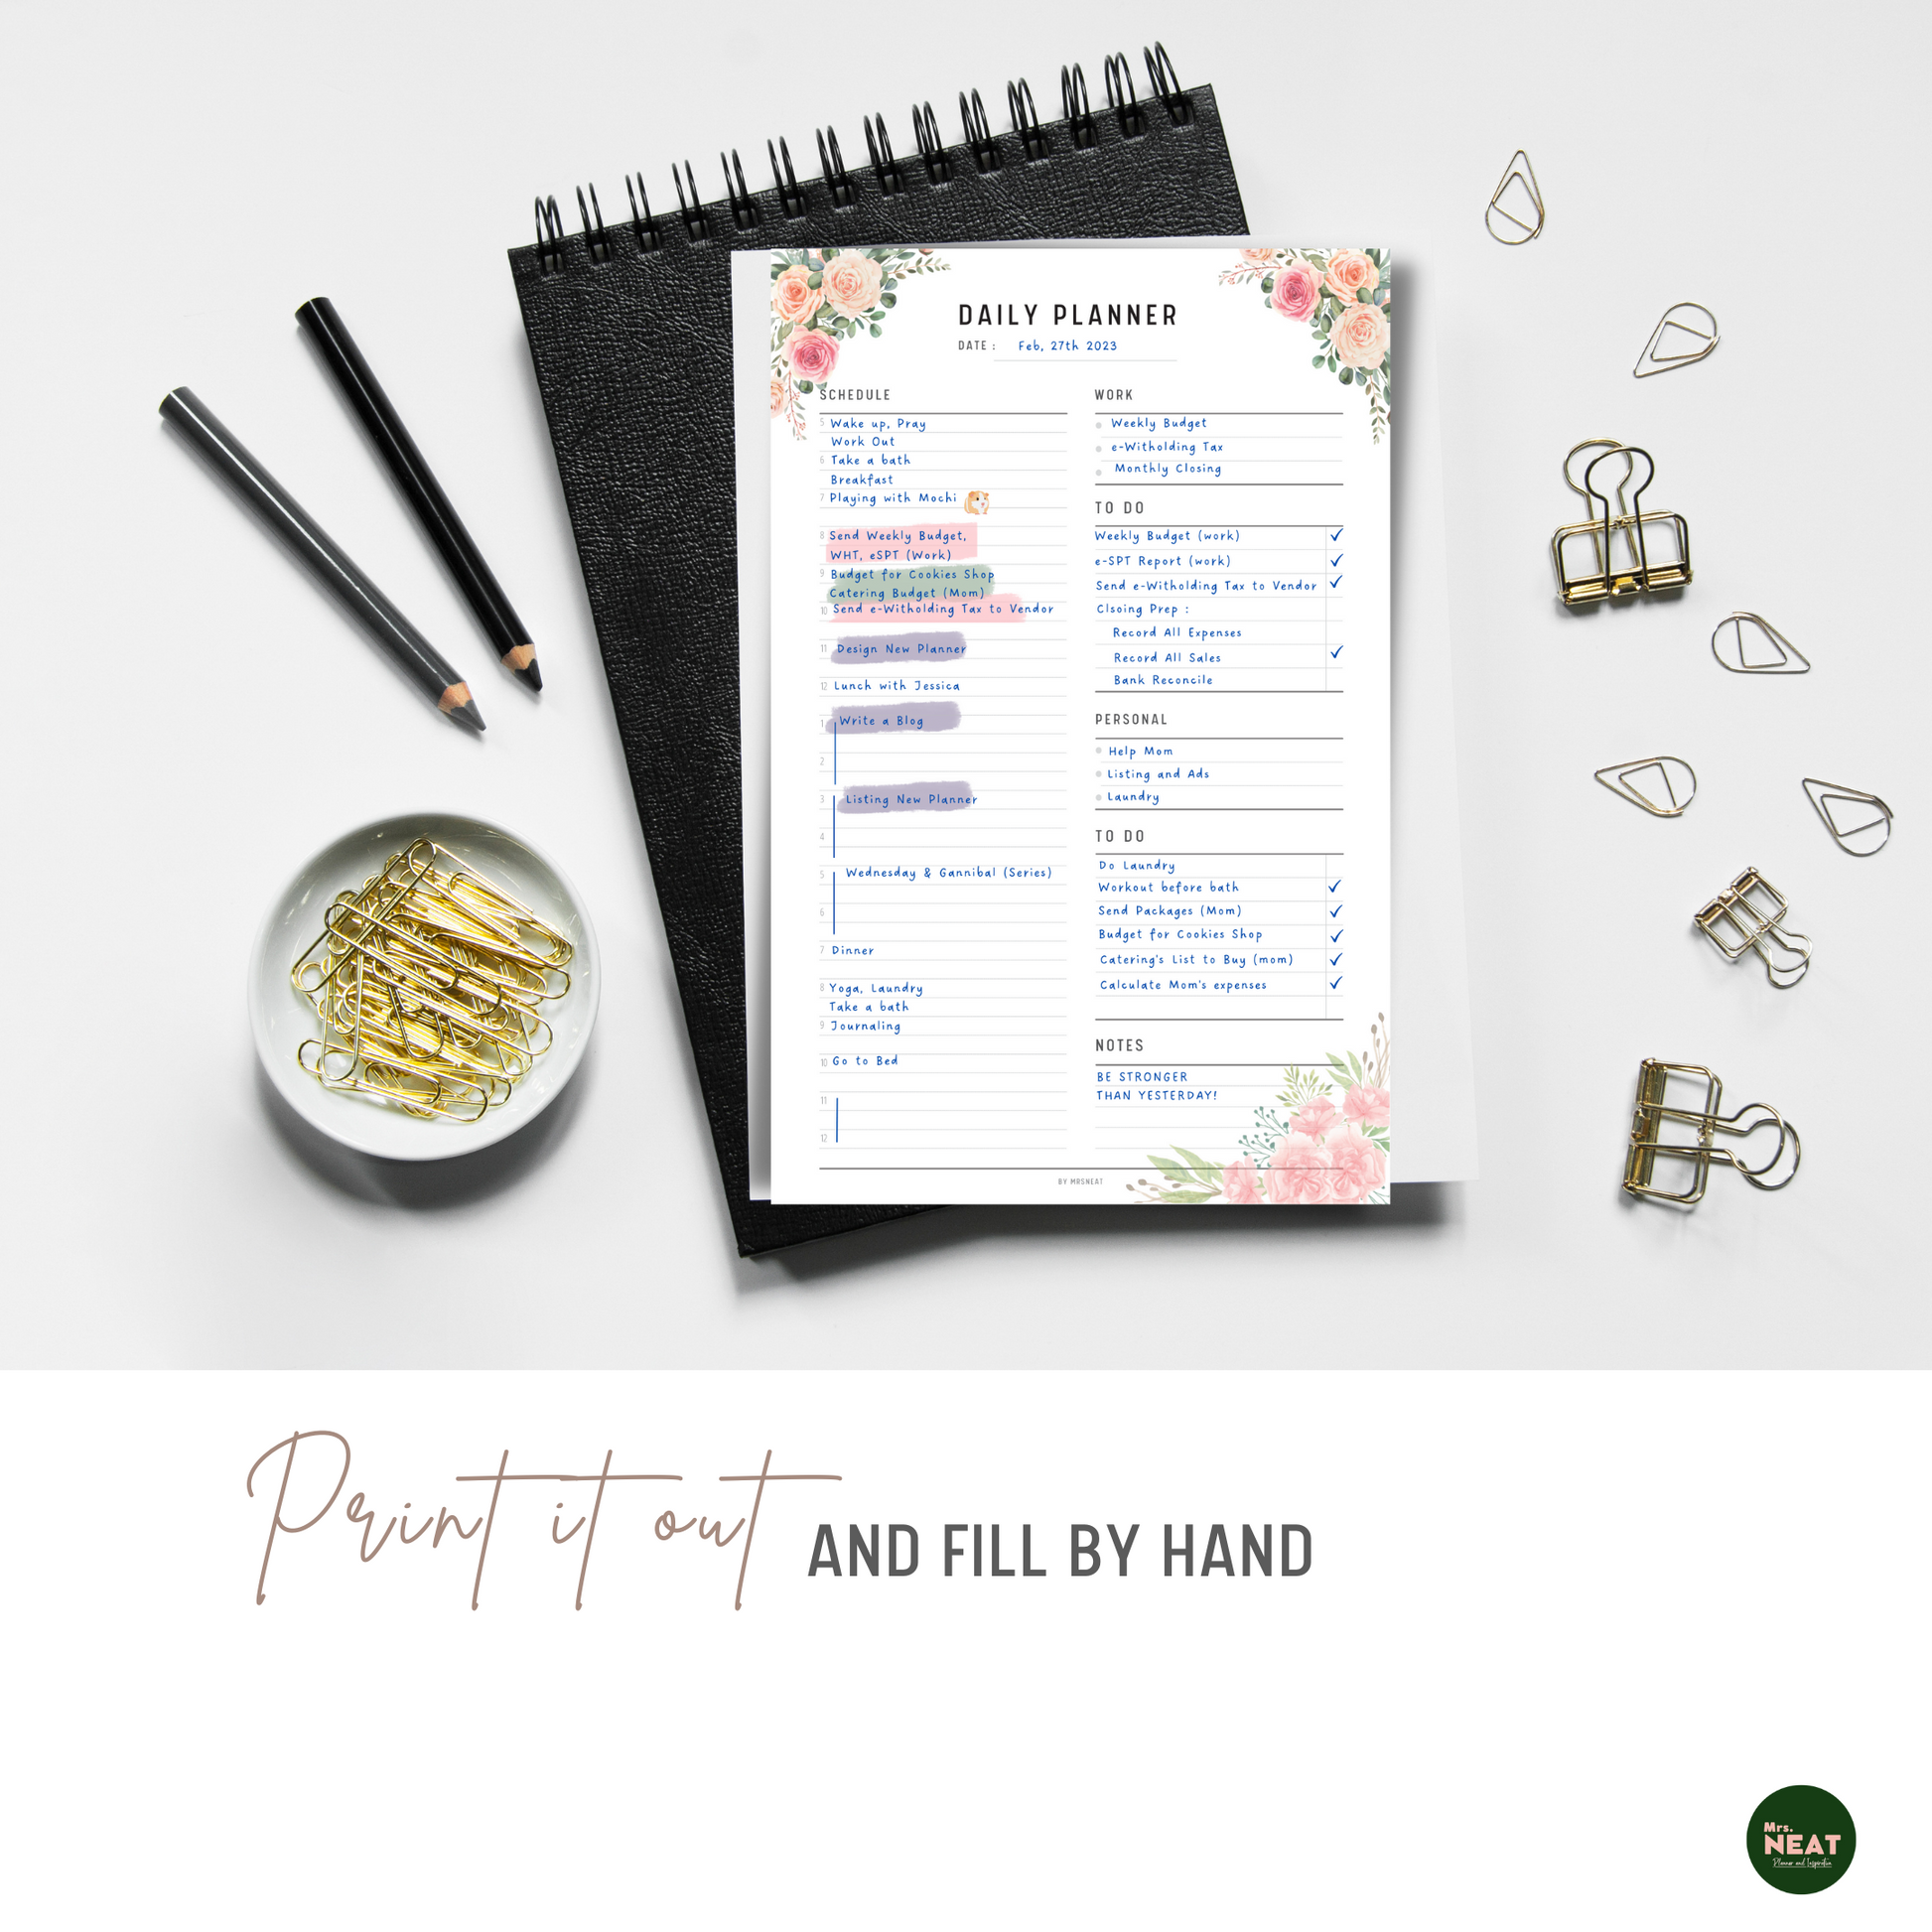 Floral Work from Home Planner Printable printed out on the paper